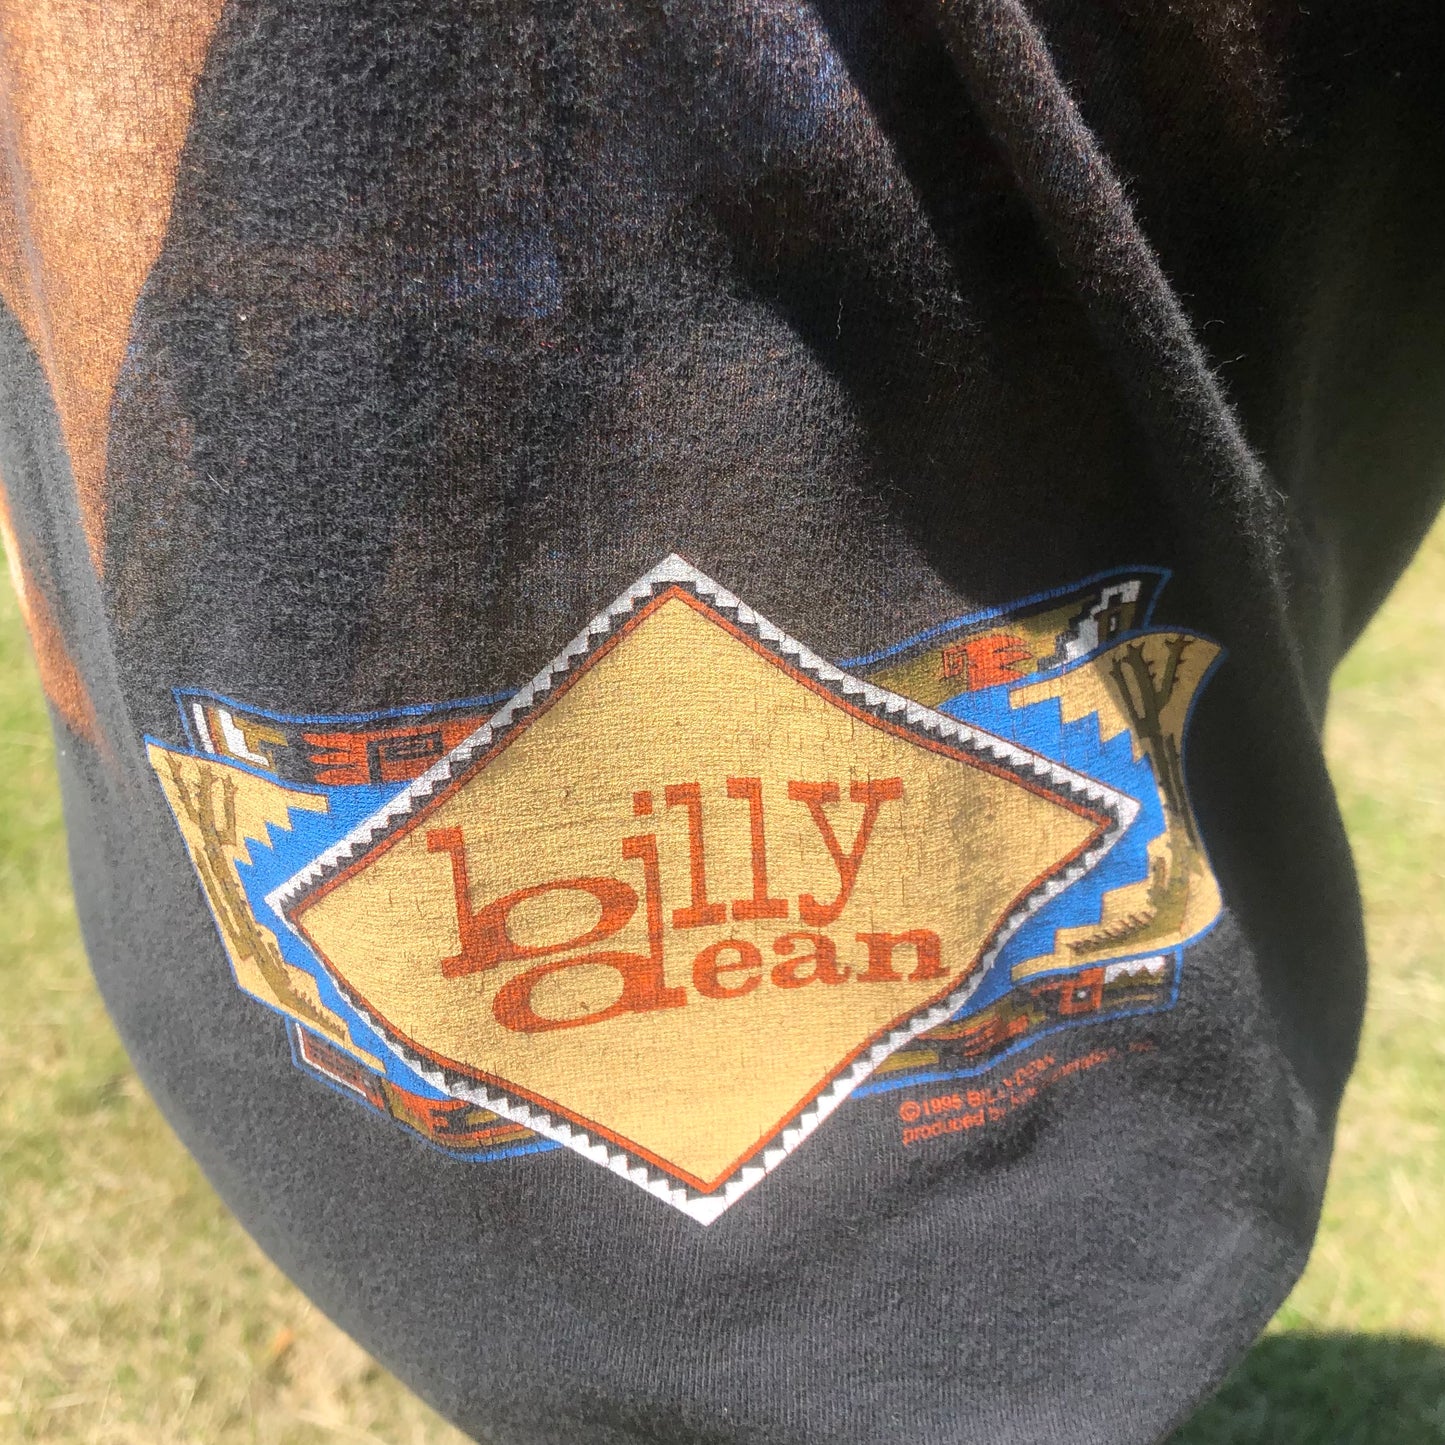 1995 Vintage Billy Dean Country Concert T-shirt